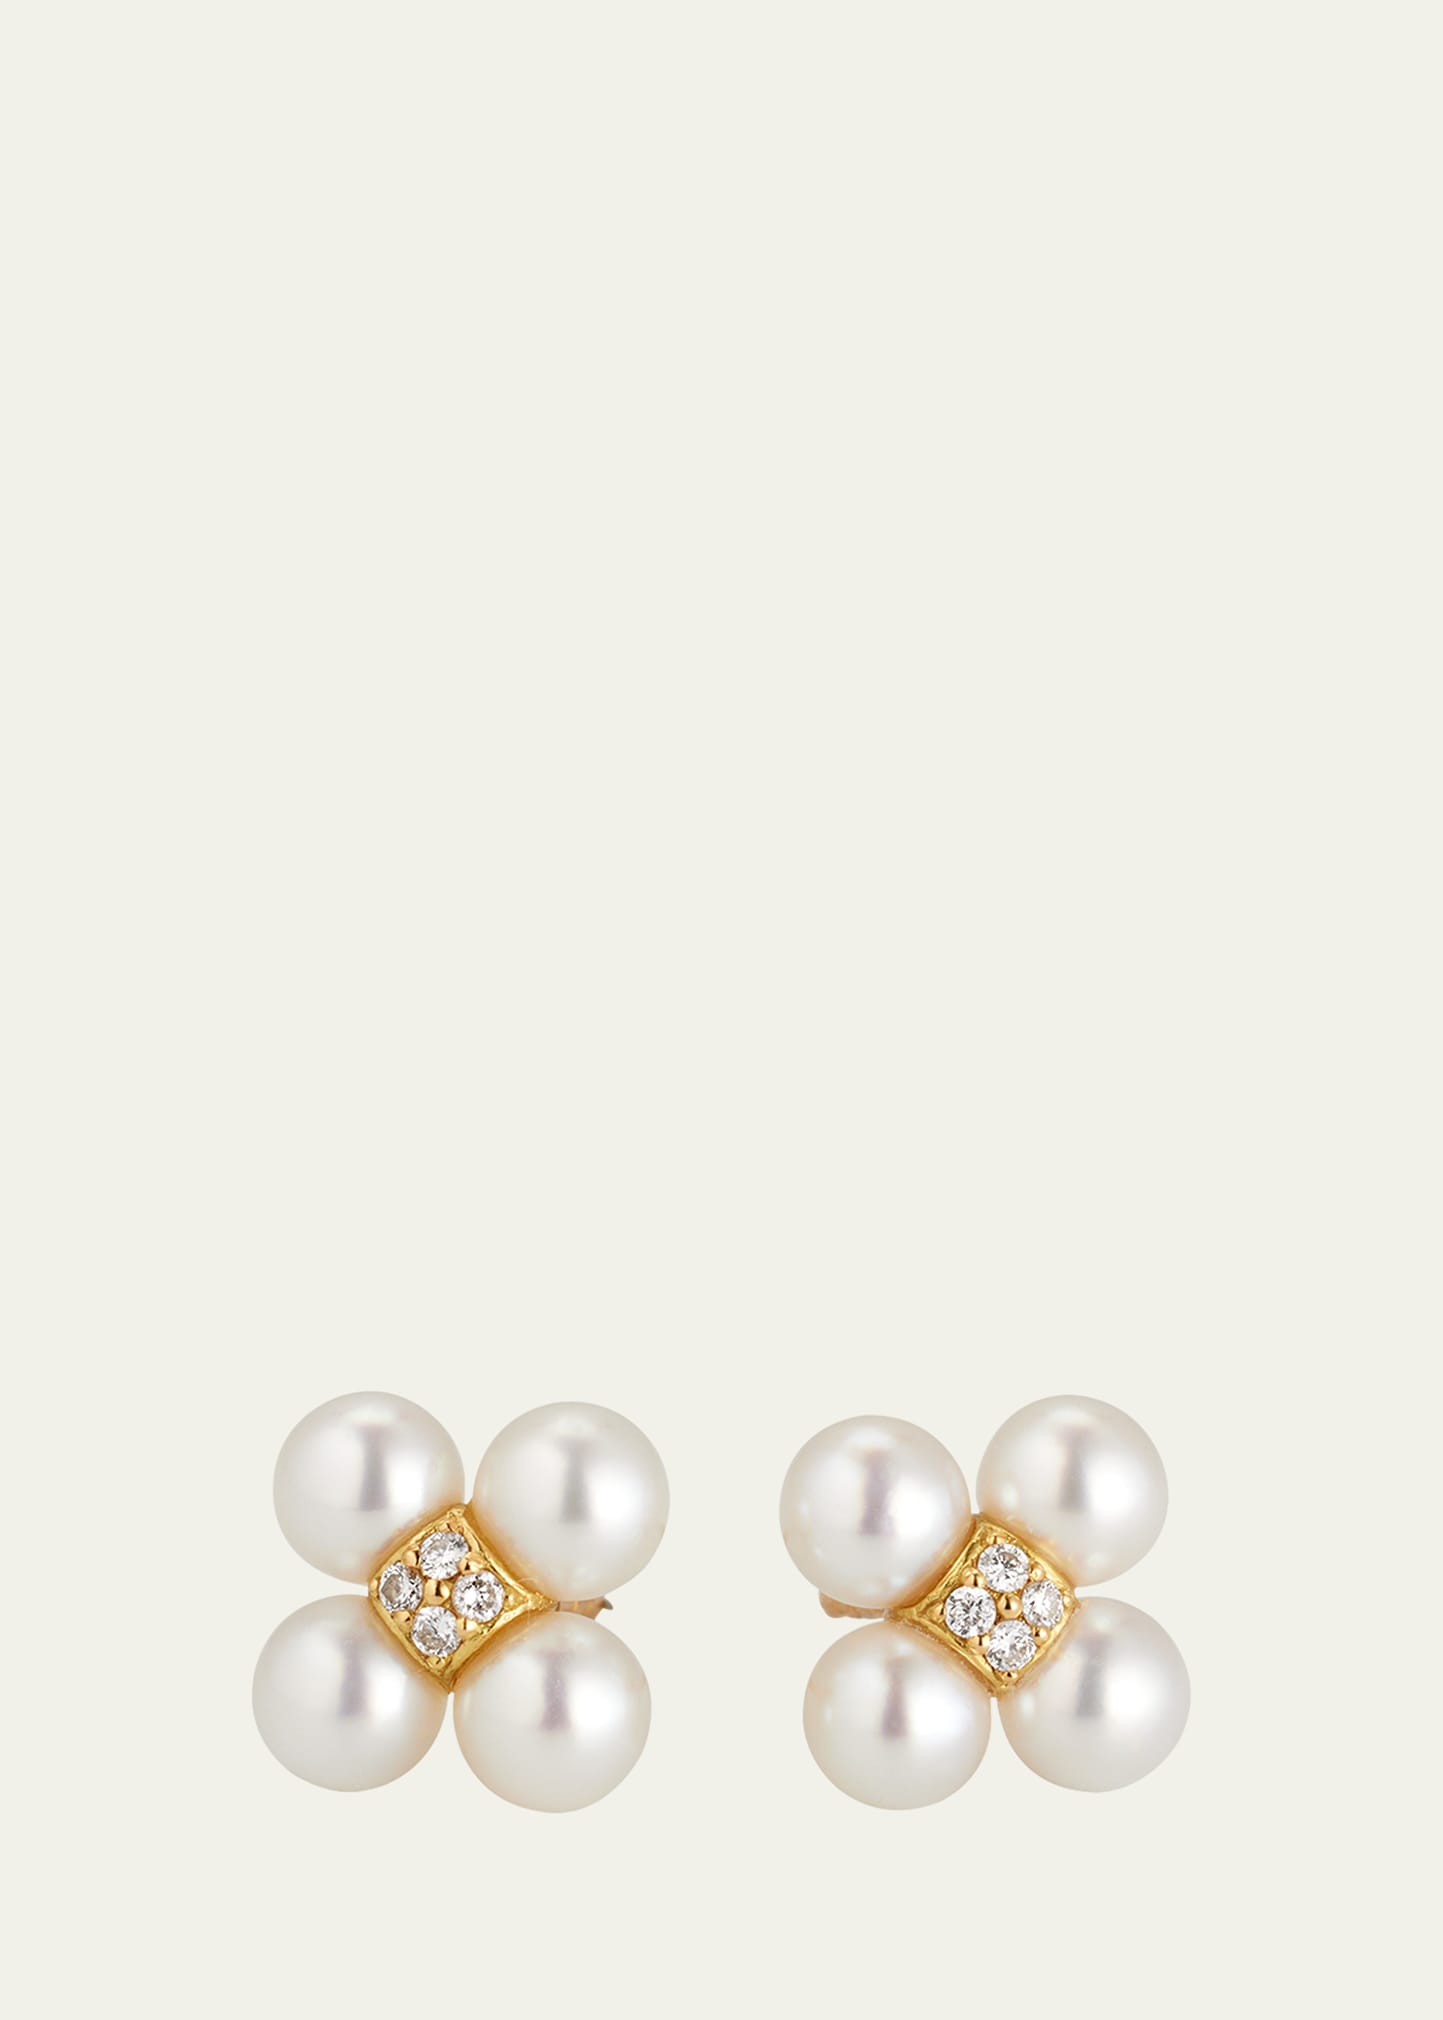 Yellow Gold Sequence Stud Earrings with Pearls and Diamonds